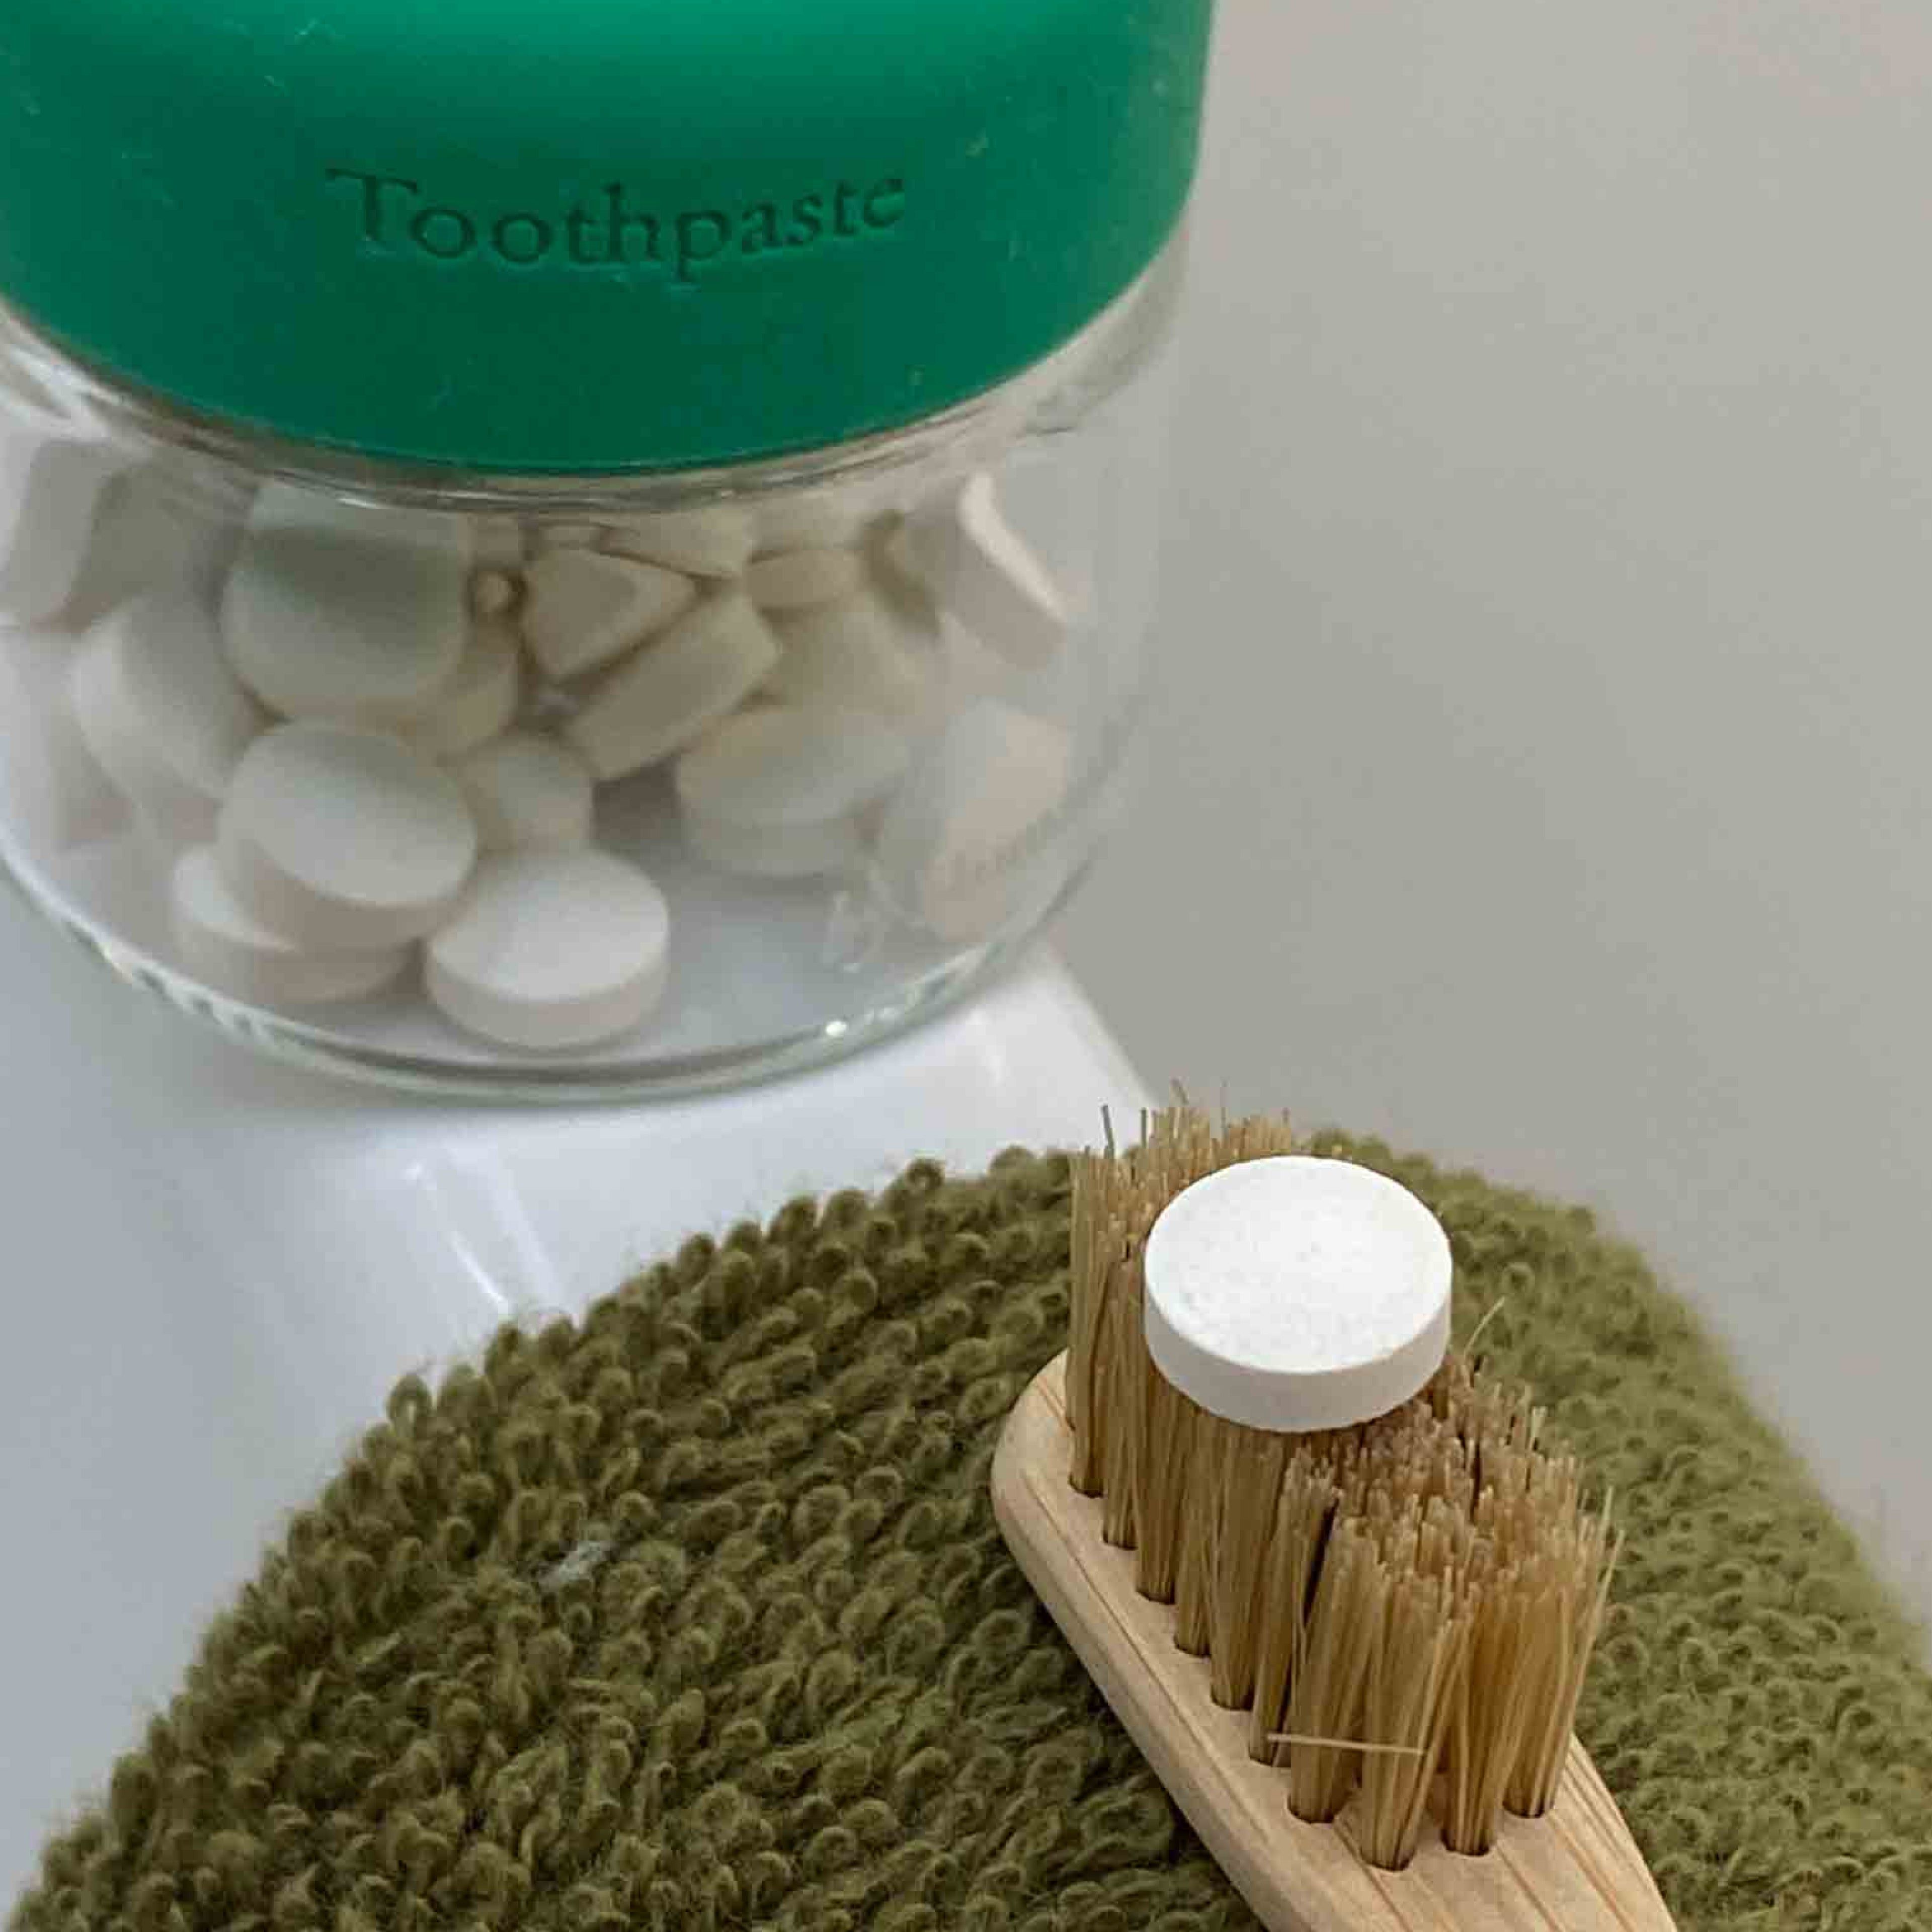 100% Natural Toothpaste Tablets